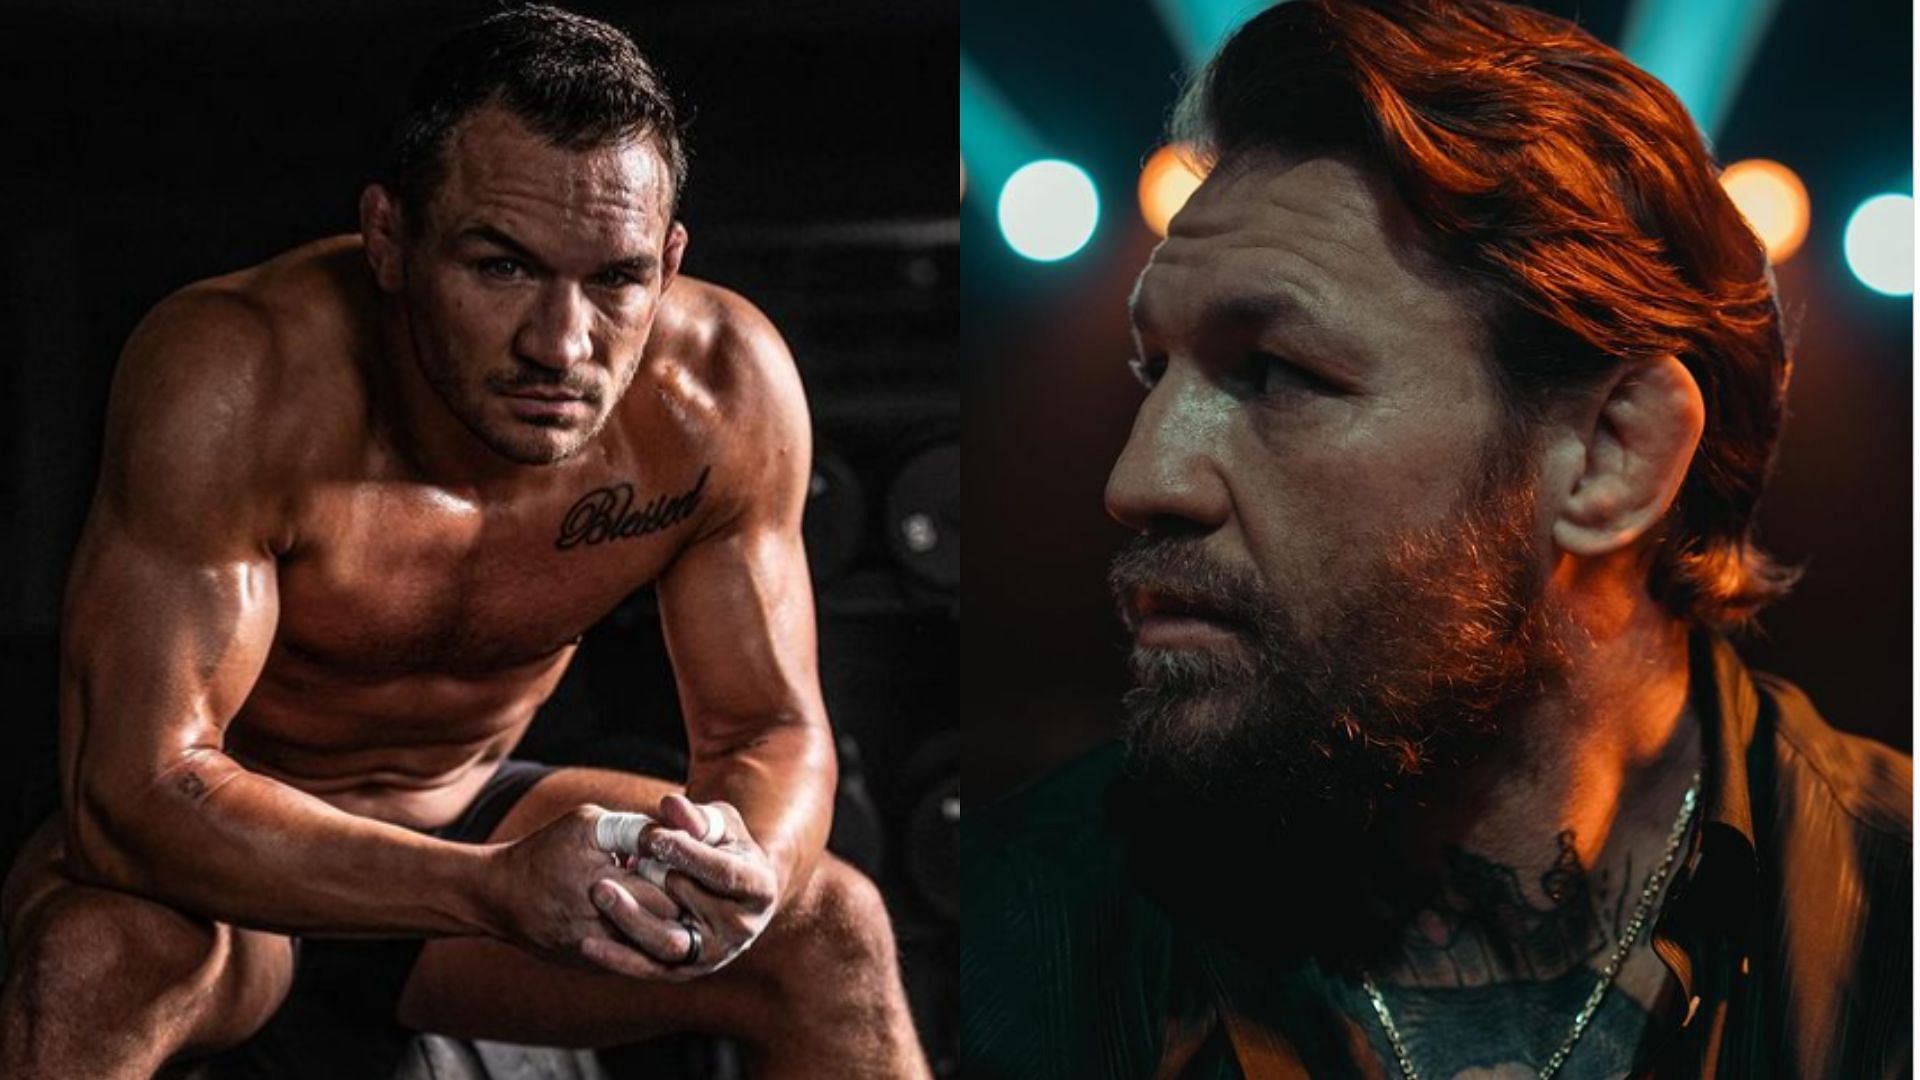 Michael Chandler (left) gives one word response to fan who labelled Conor McGregor (right) a billionaire [Images courtesy of @thenotoriousmma &amp; @mikechandlermma on Instagram]